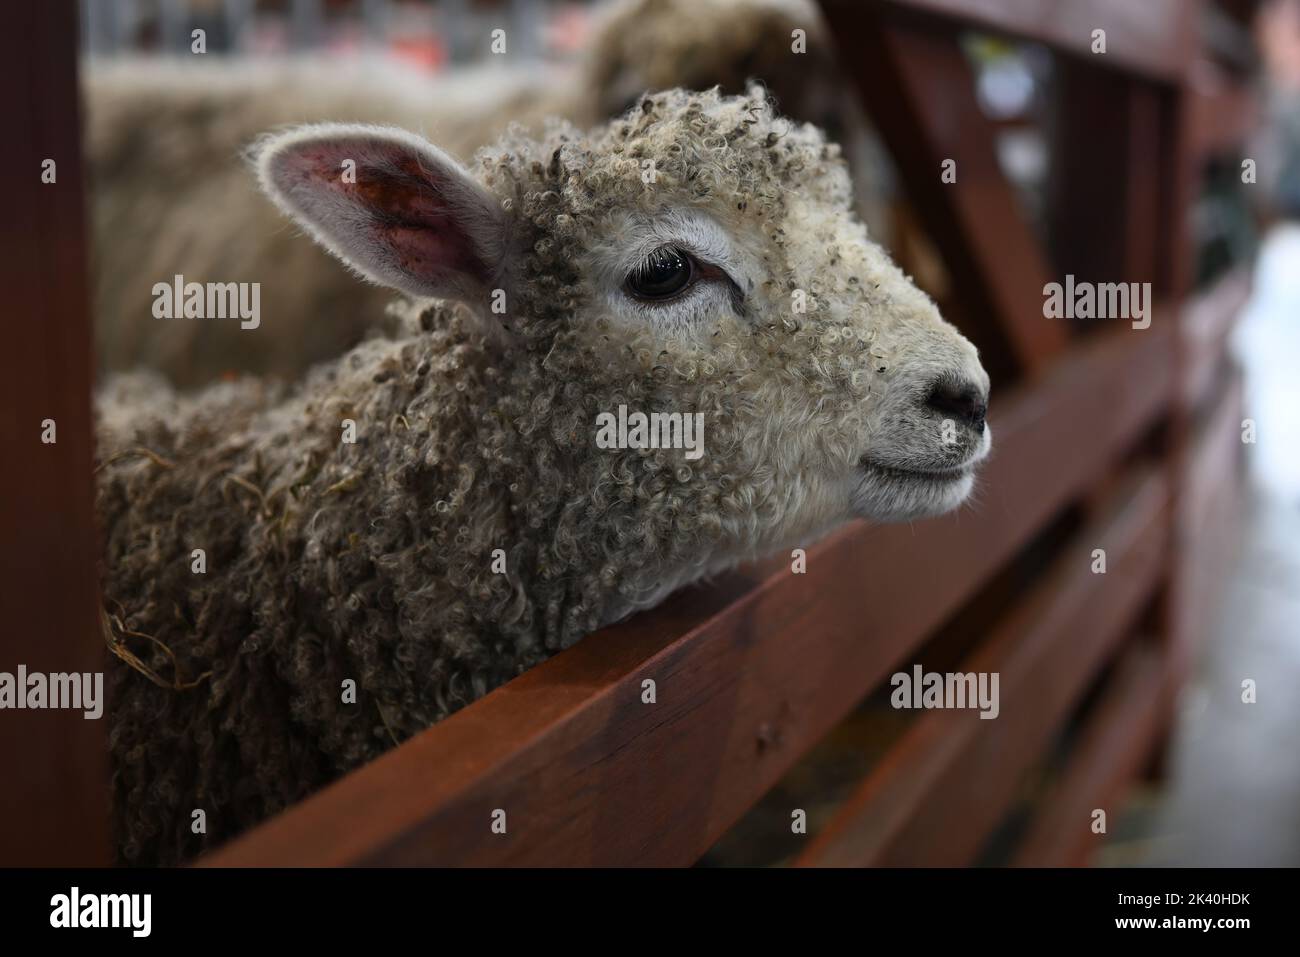 Side view of a lamb, or baby sheep, poking its head through the gap in a wooden gate, with shallow depth of field Stock Photo